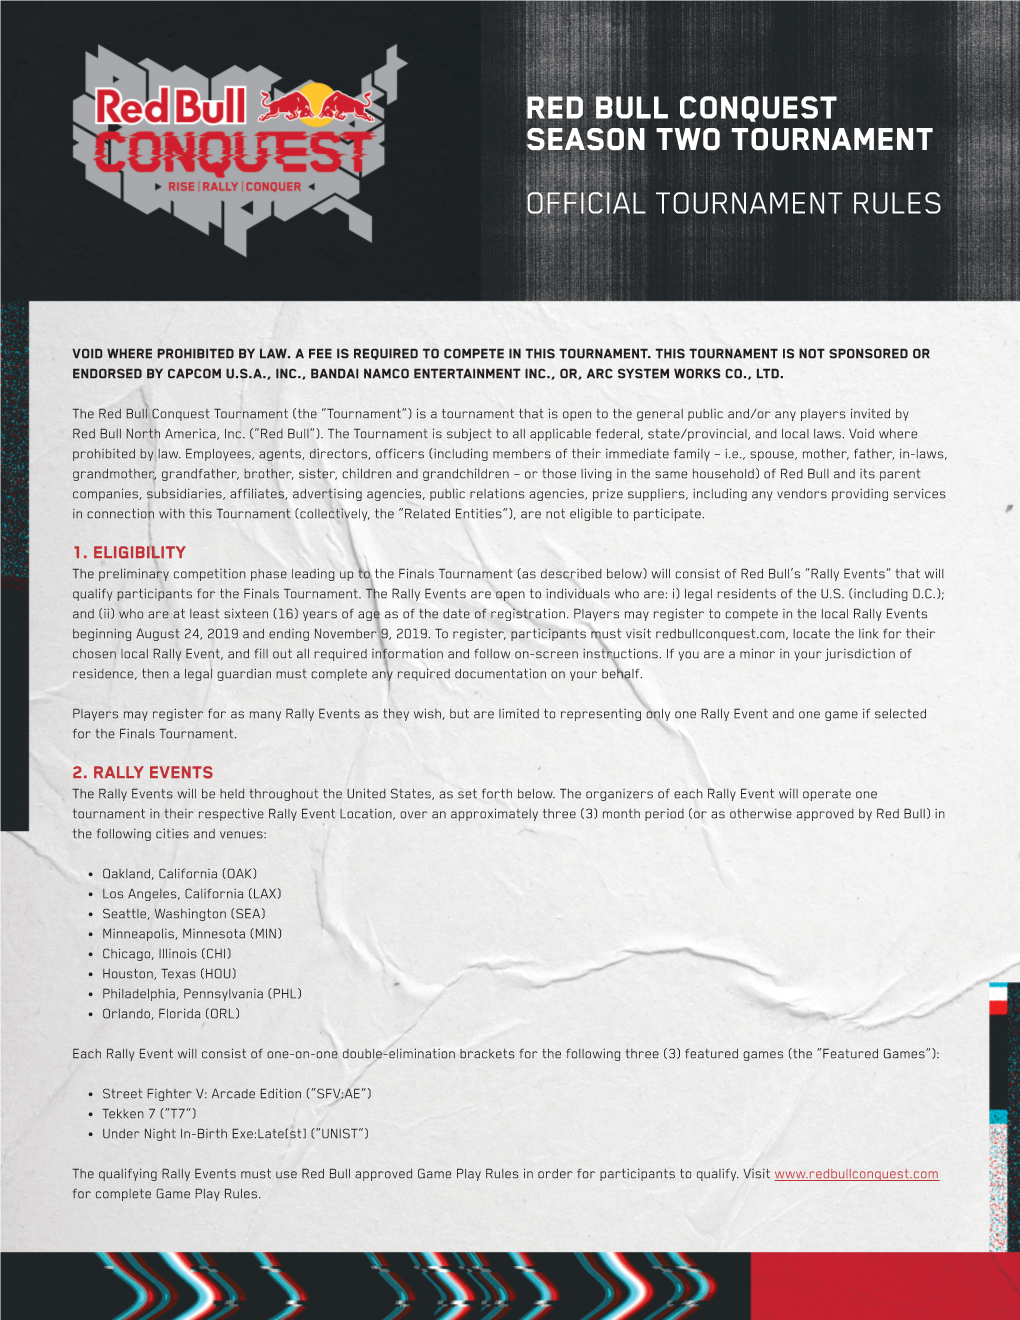 Red Bull Conquest Season Two Tournament OFFICIAL TOURNAMENT RULES